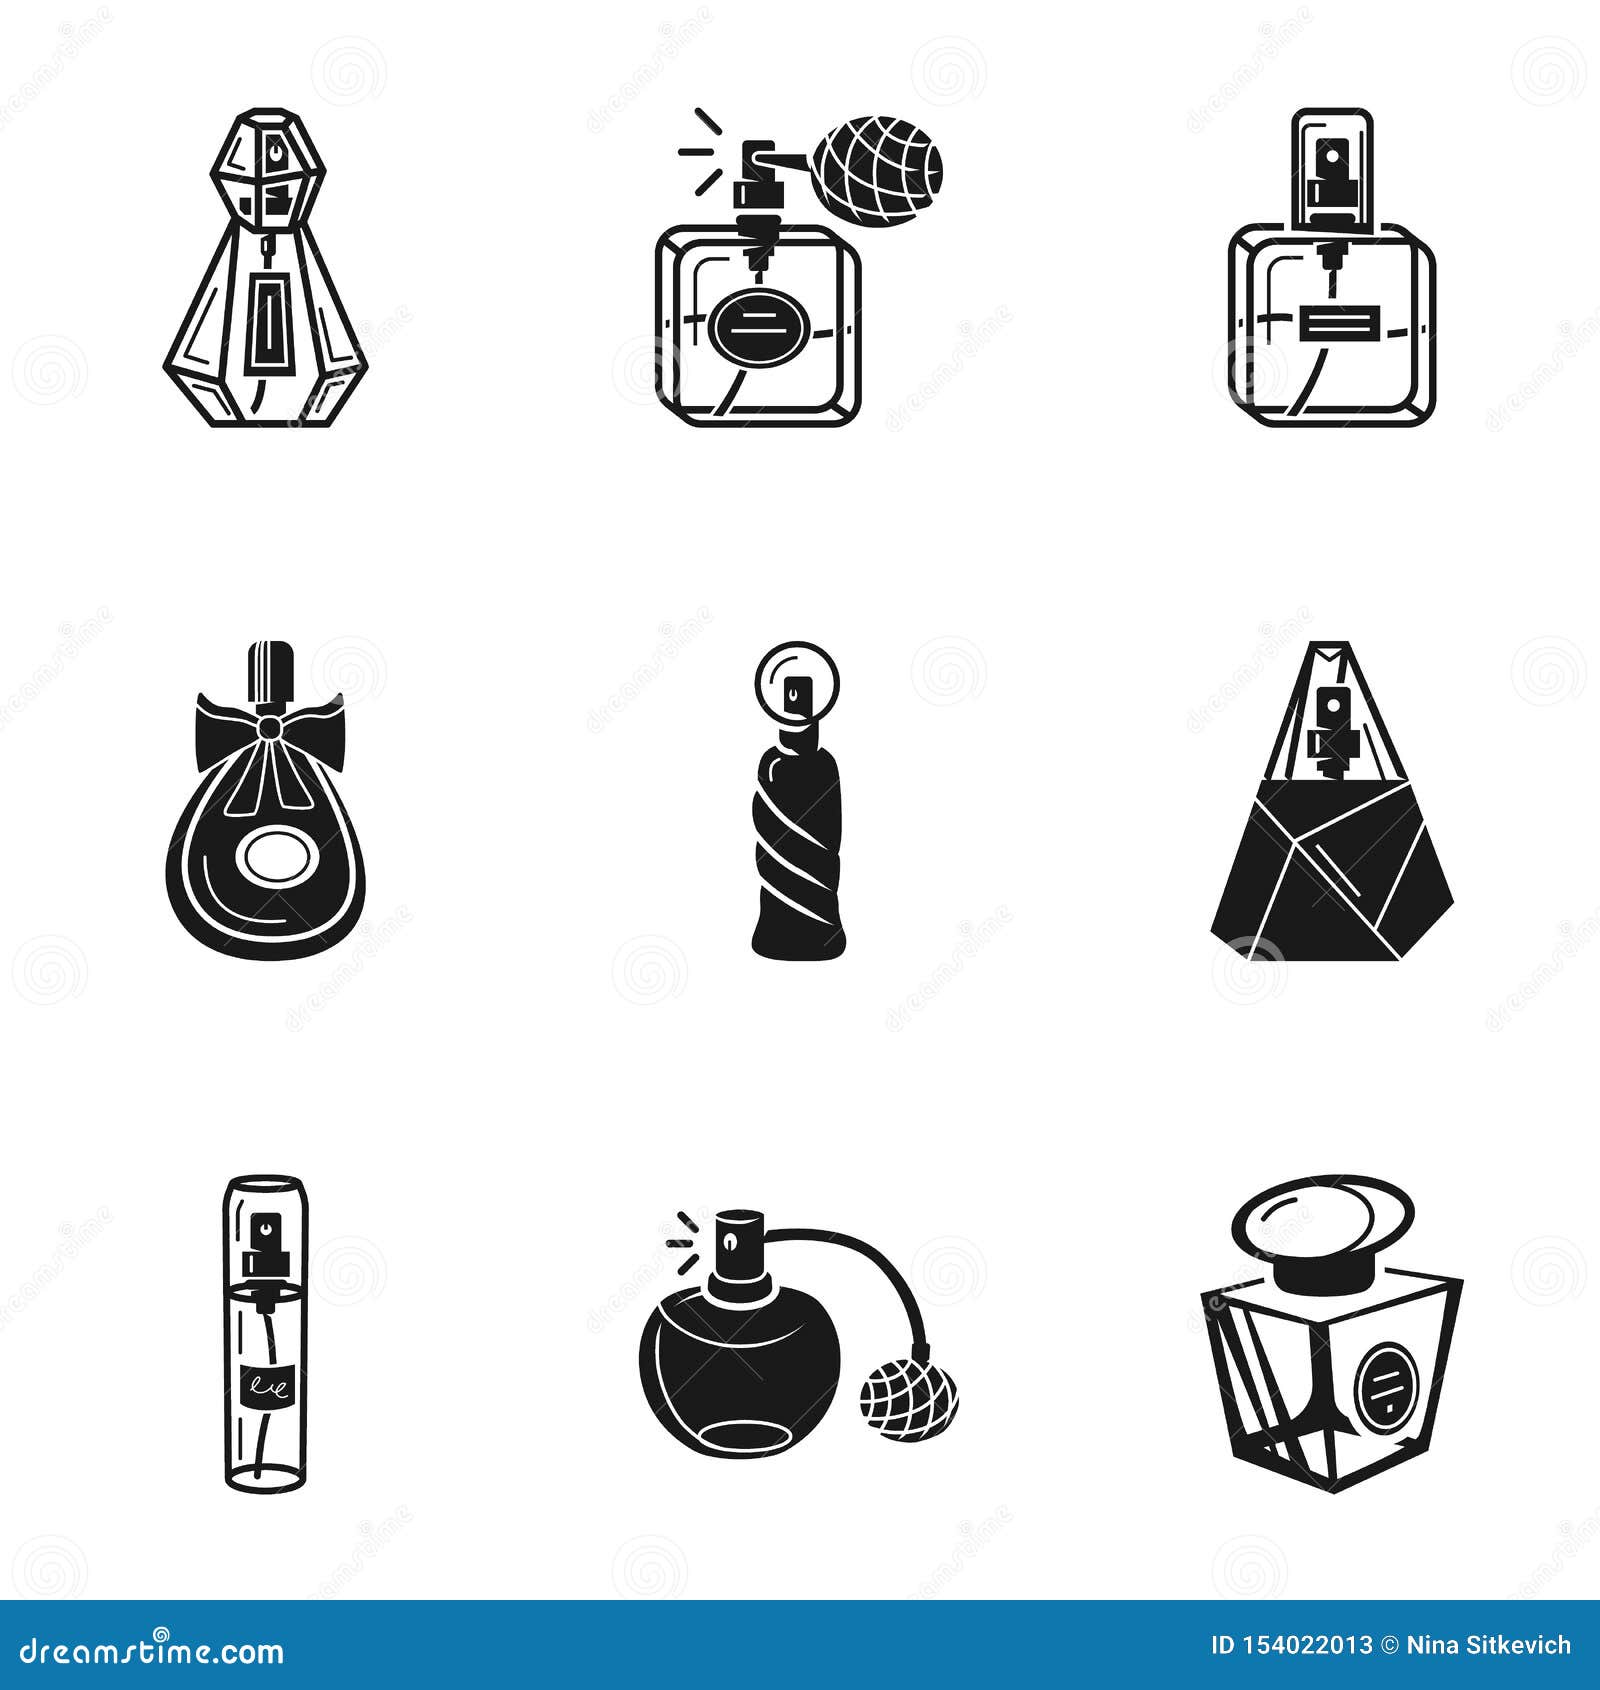 Glass perfume bottle icon. Simple illustration of glass perfume bottle  vector icon for web design isolated on white background Stock Vector